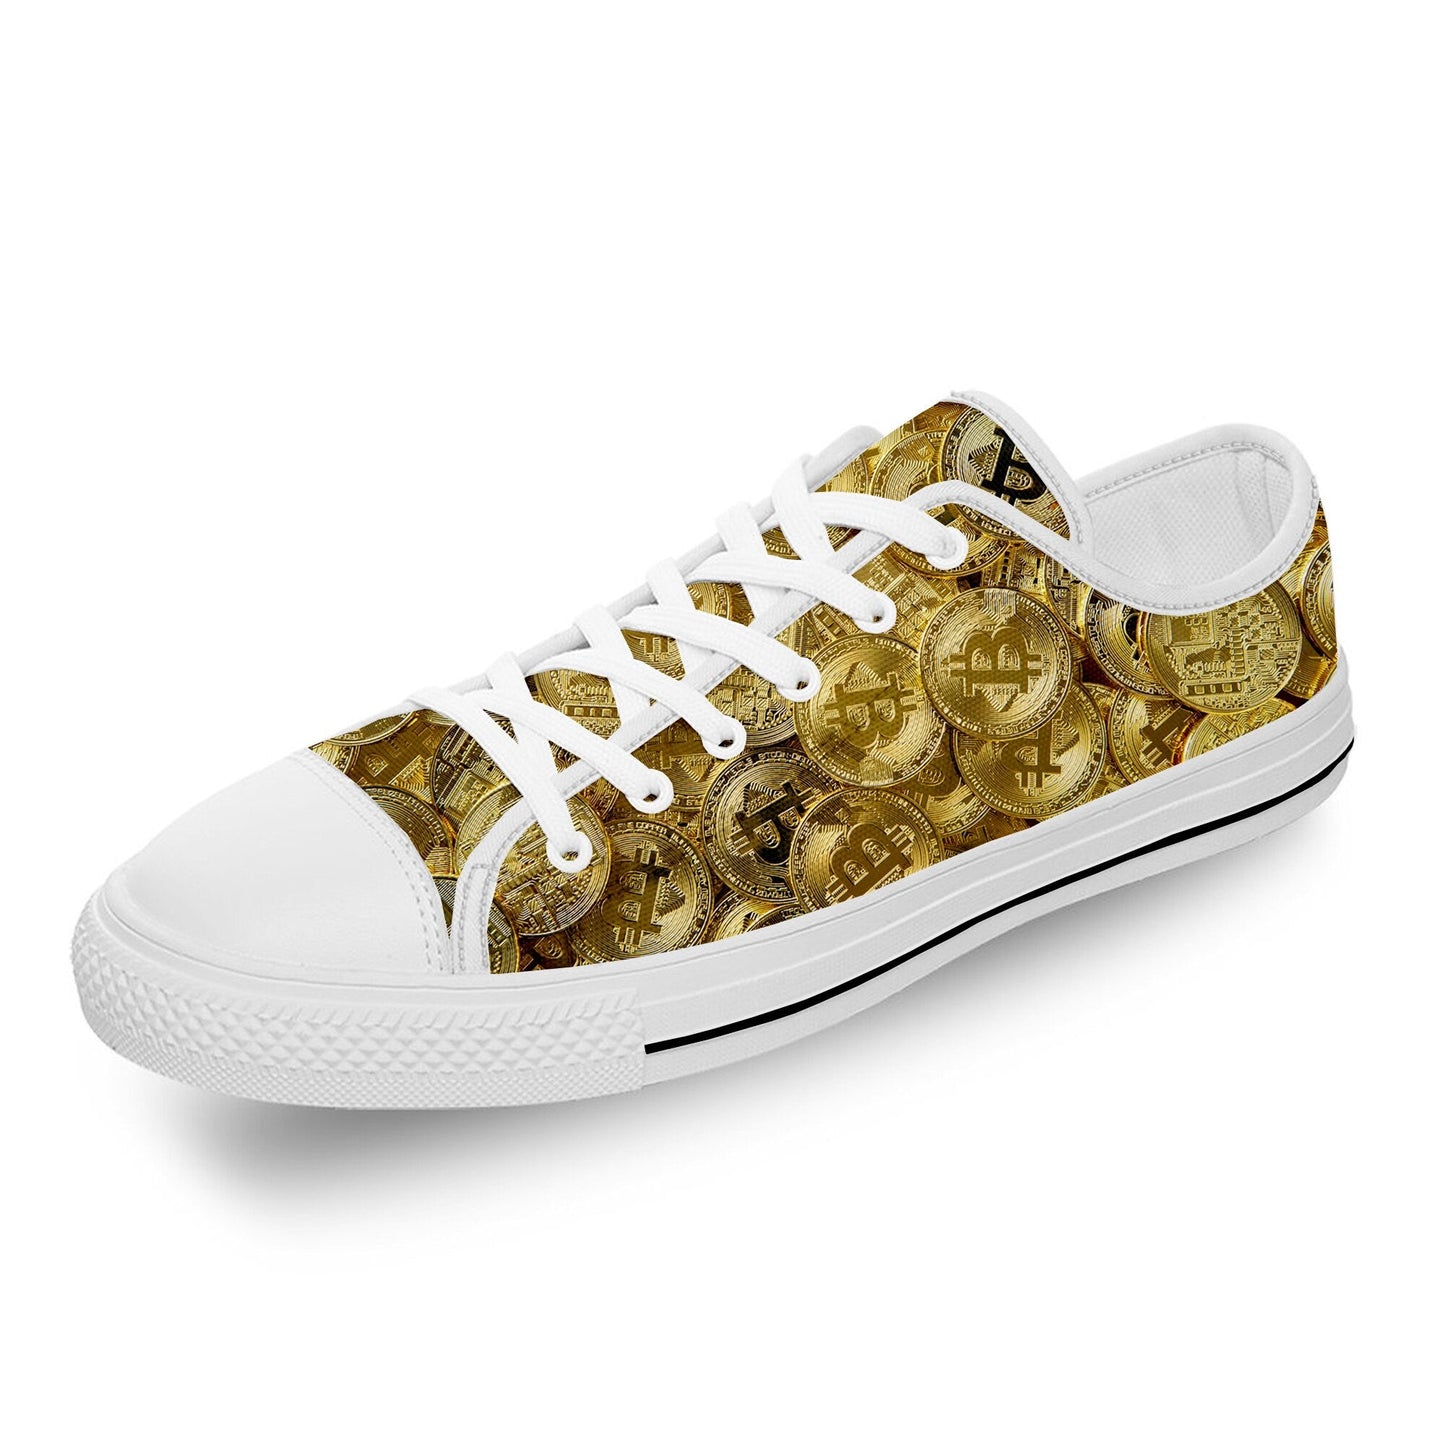 Copy of Bitcoin cryptocurrency shoes